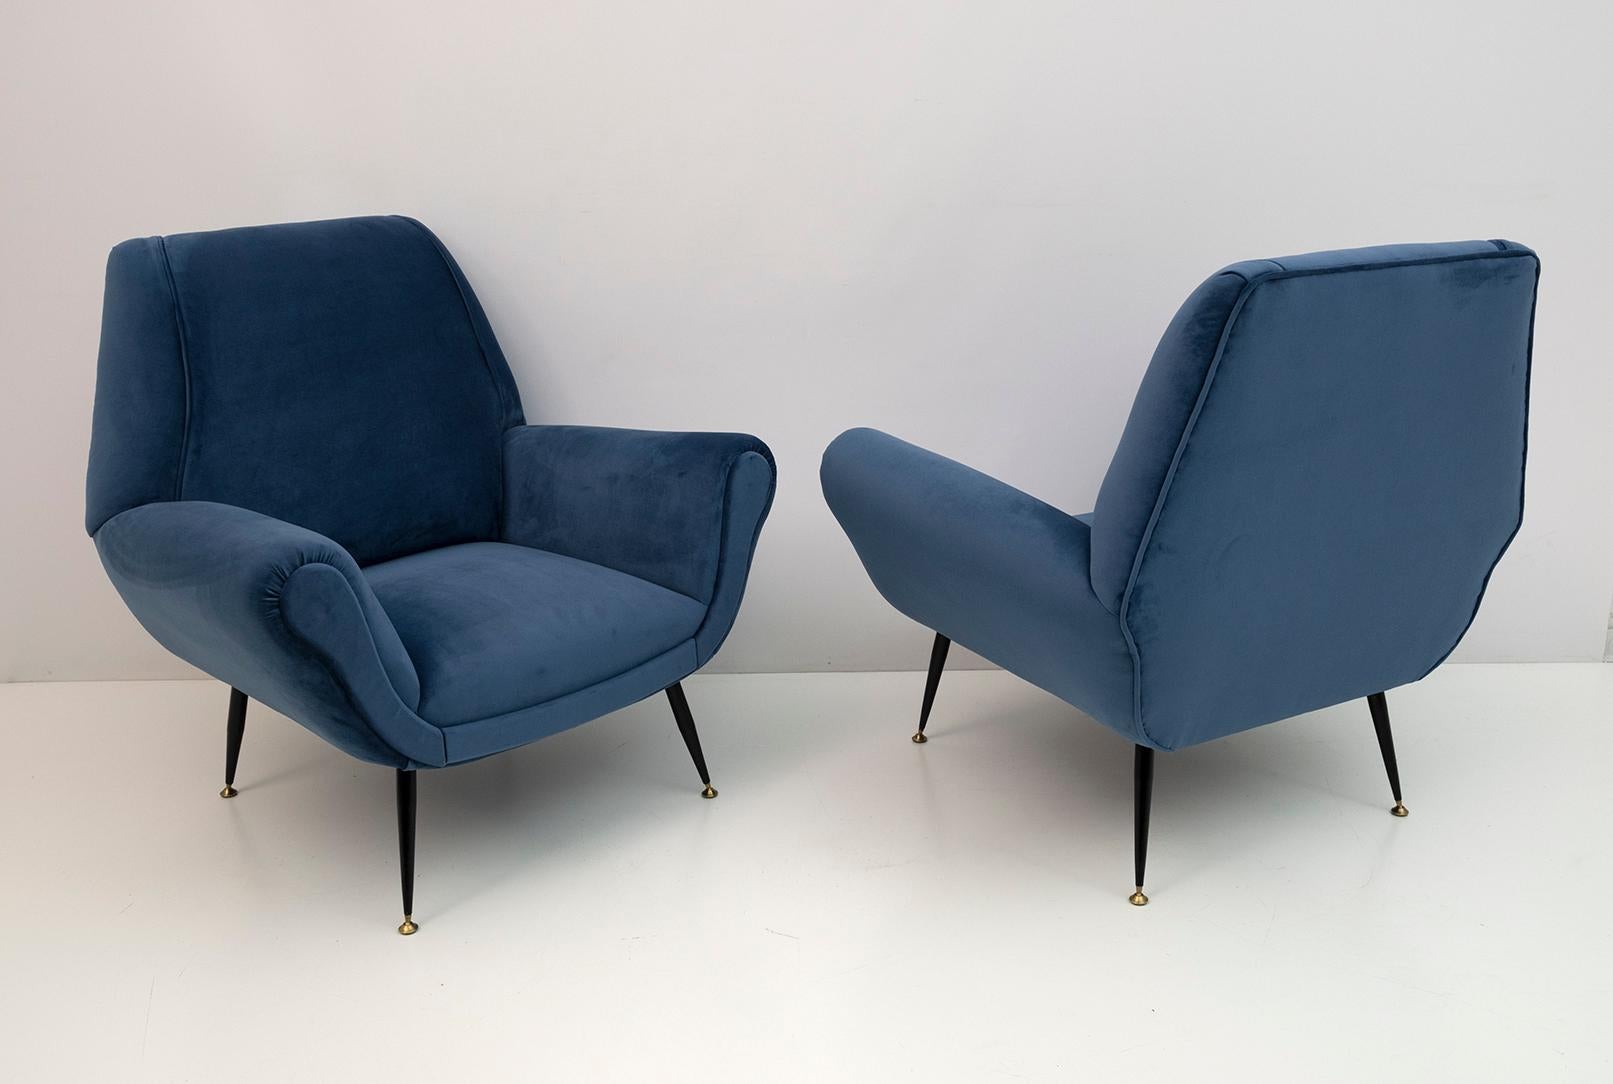 Pair of armchairs designed by Gigi Radice for Minotti. They are made with solid wood structure and blue velvet upholstery with metal and brass legs. The structures are authentic, only the upholstery and padding have been replaced.